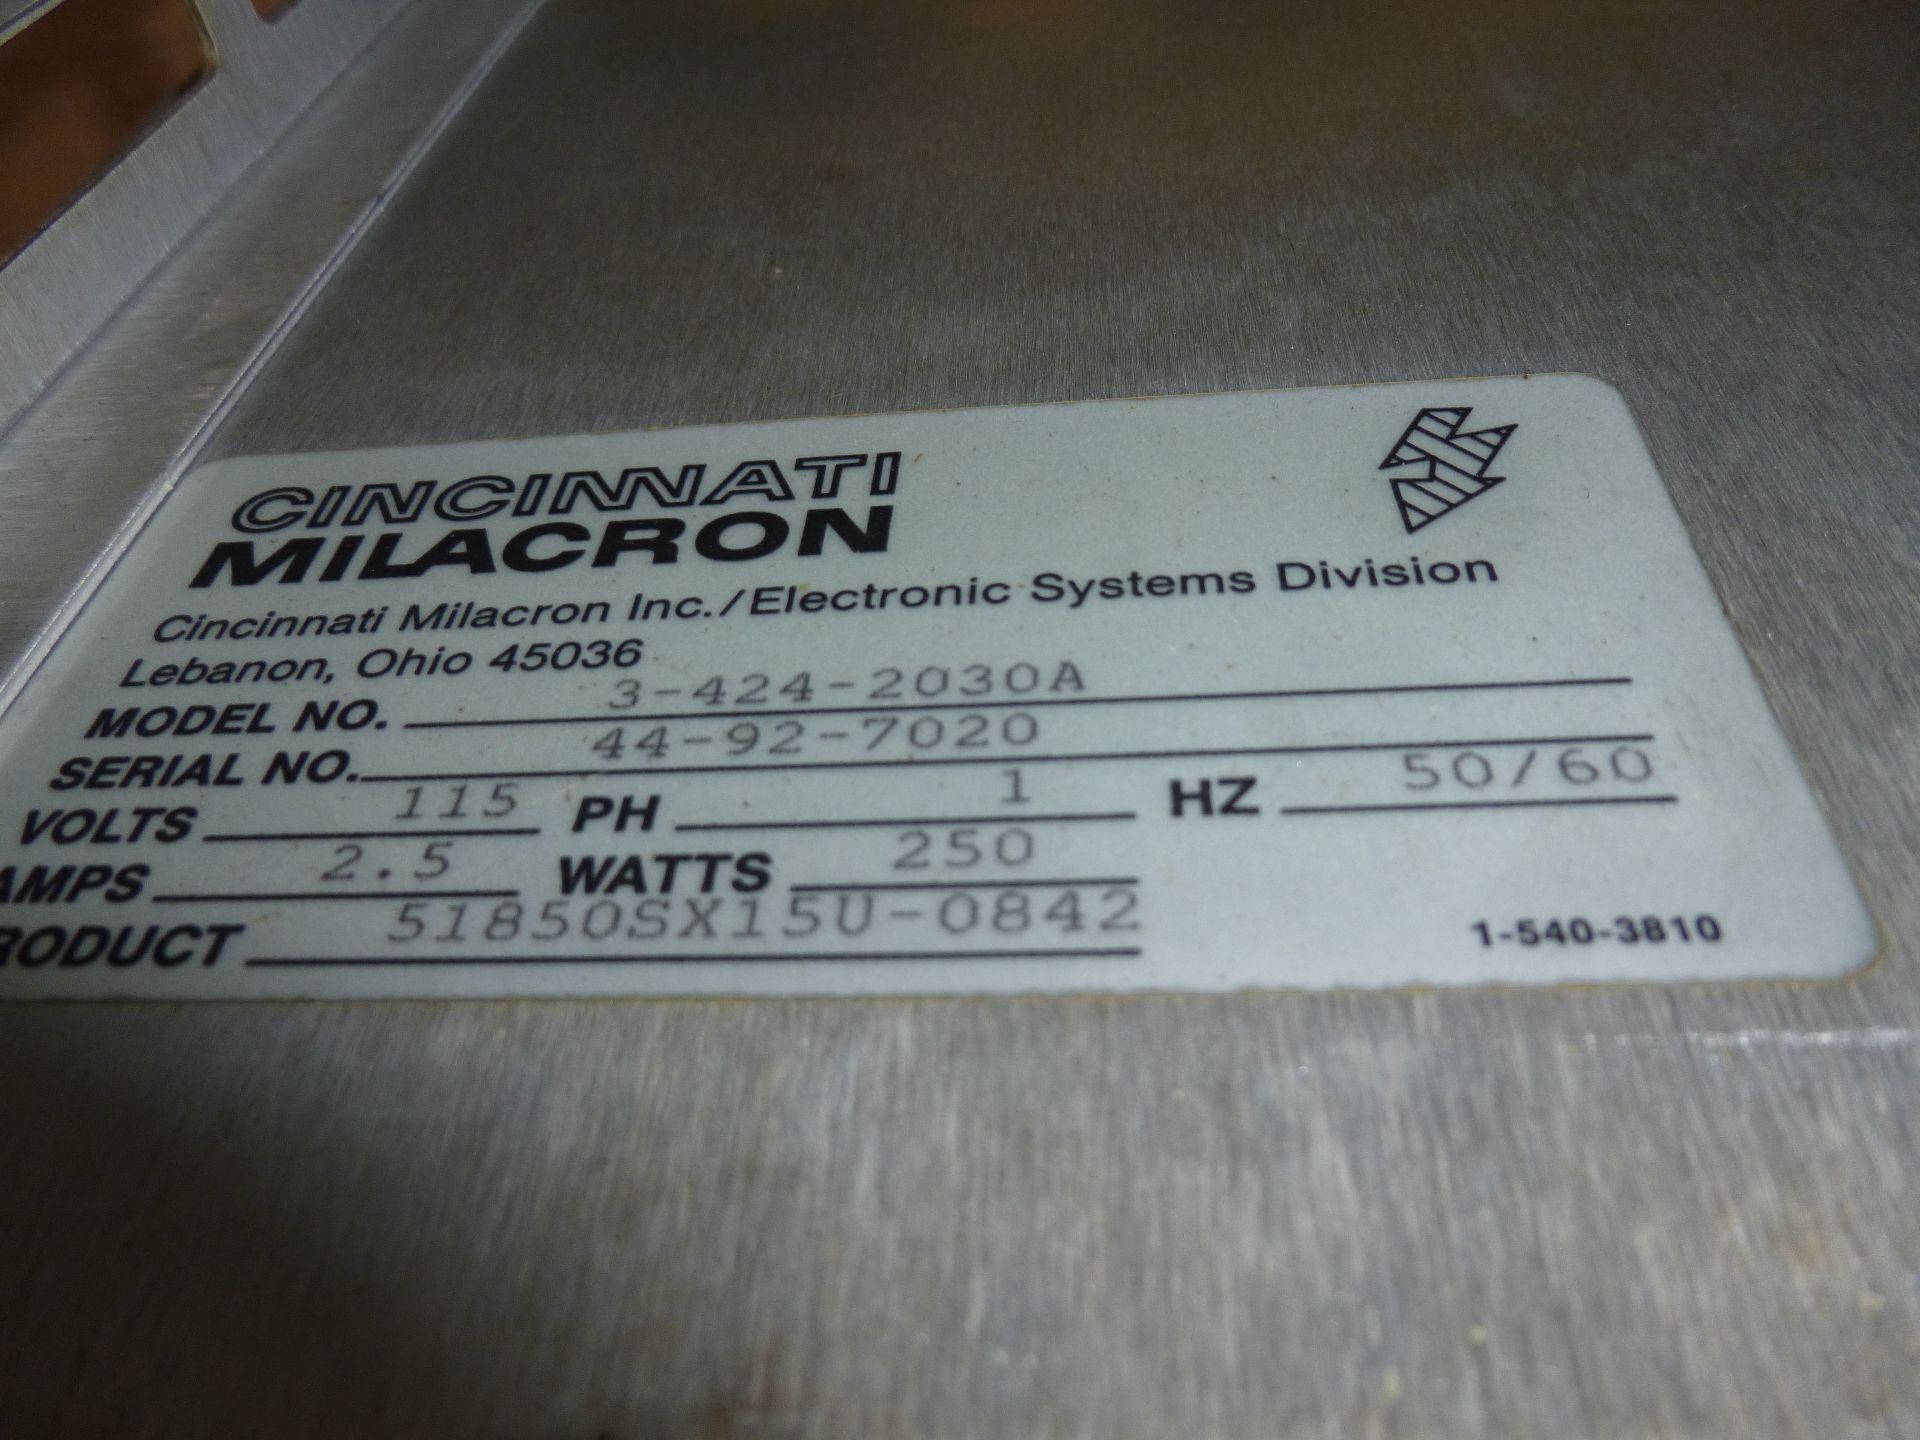 Cincinnati Milicron rach with model 3-424-2030A power supply, as always with Brolyn LLC auctions, - Image 2 of 2